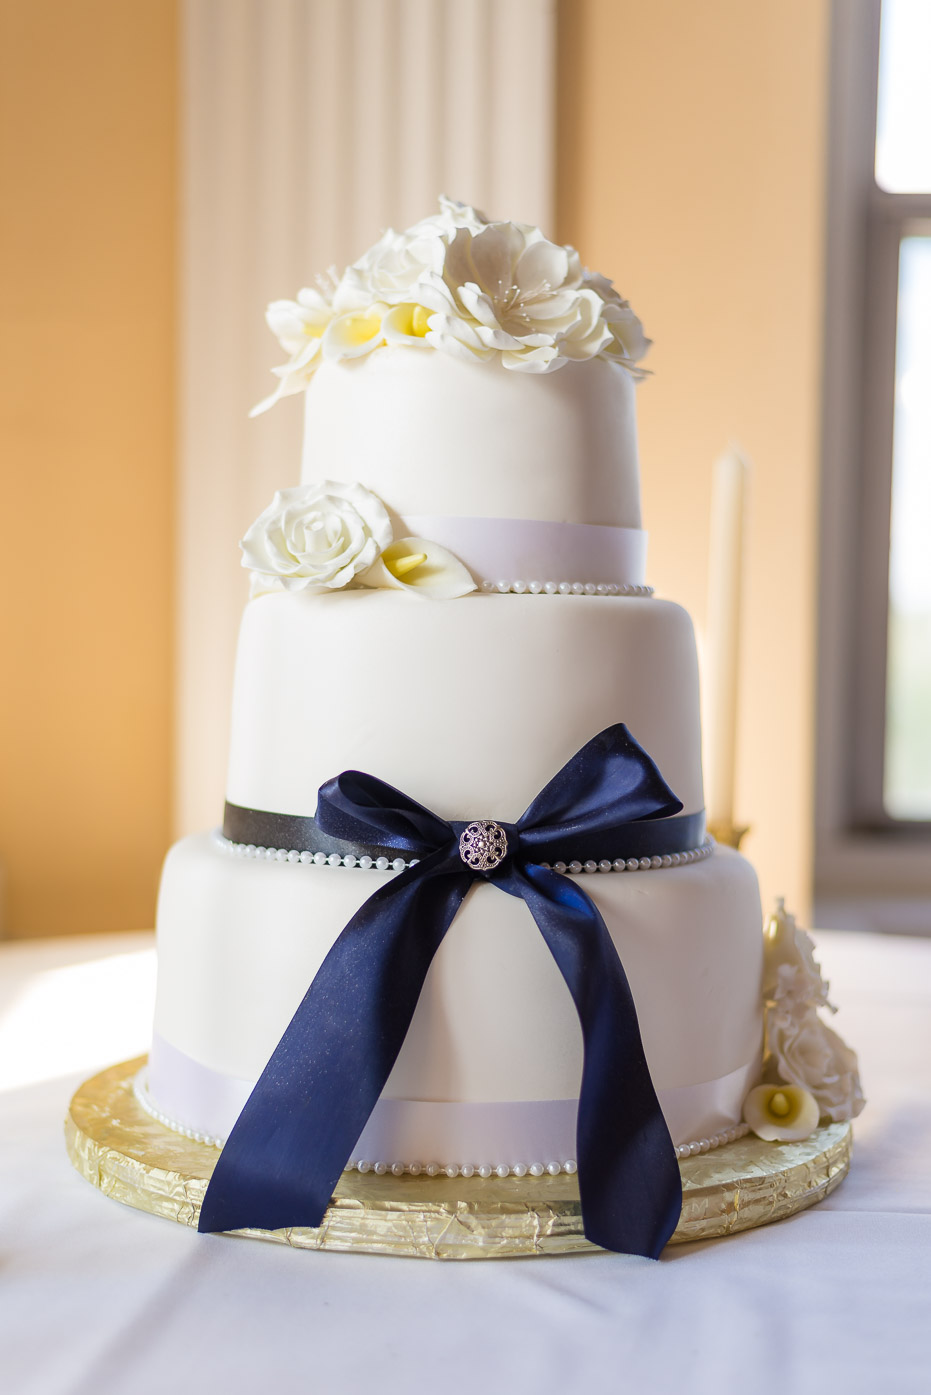 Wedding Cake with Blue Bow and Flowers